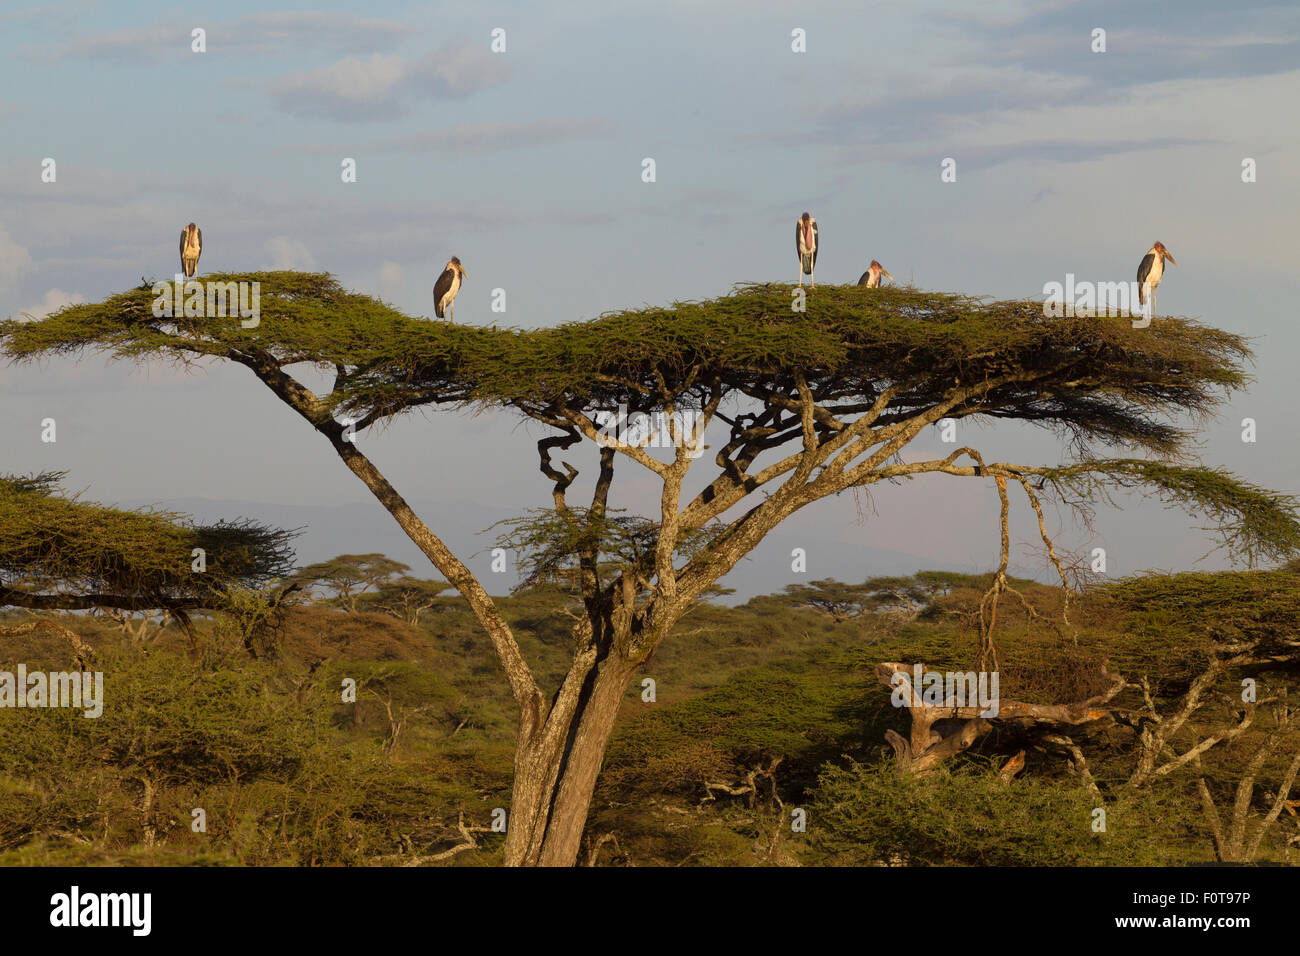 Maribou Storks form a Gentleman's Club on the top of an Acacia Treee Stock Photo